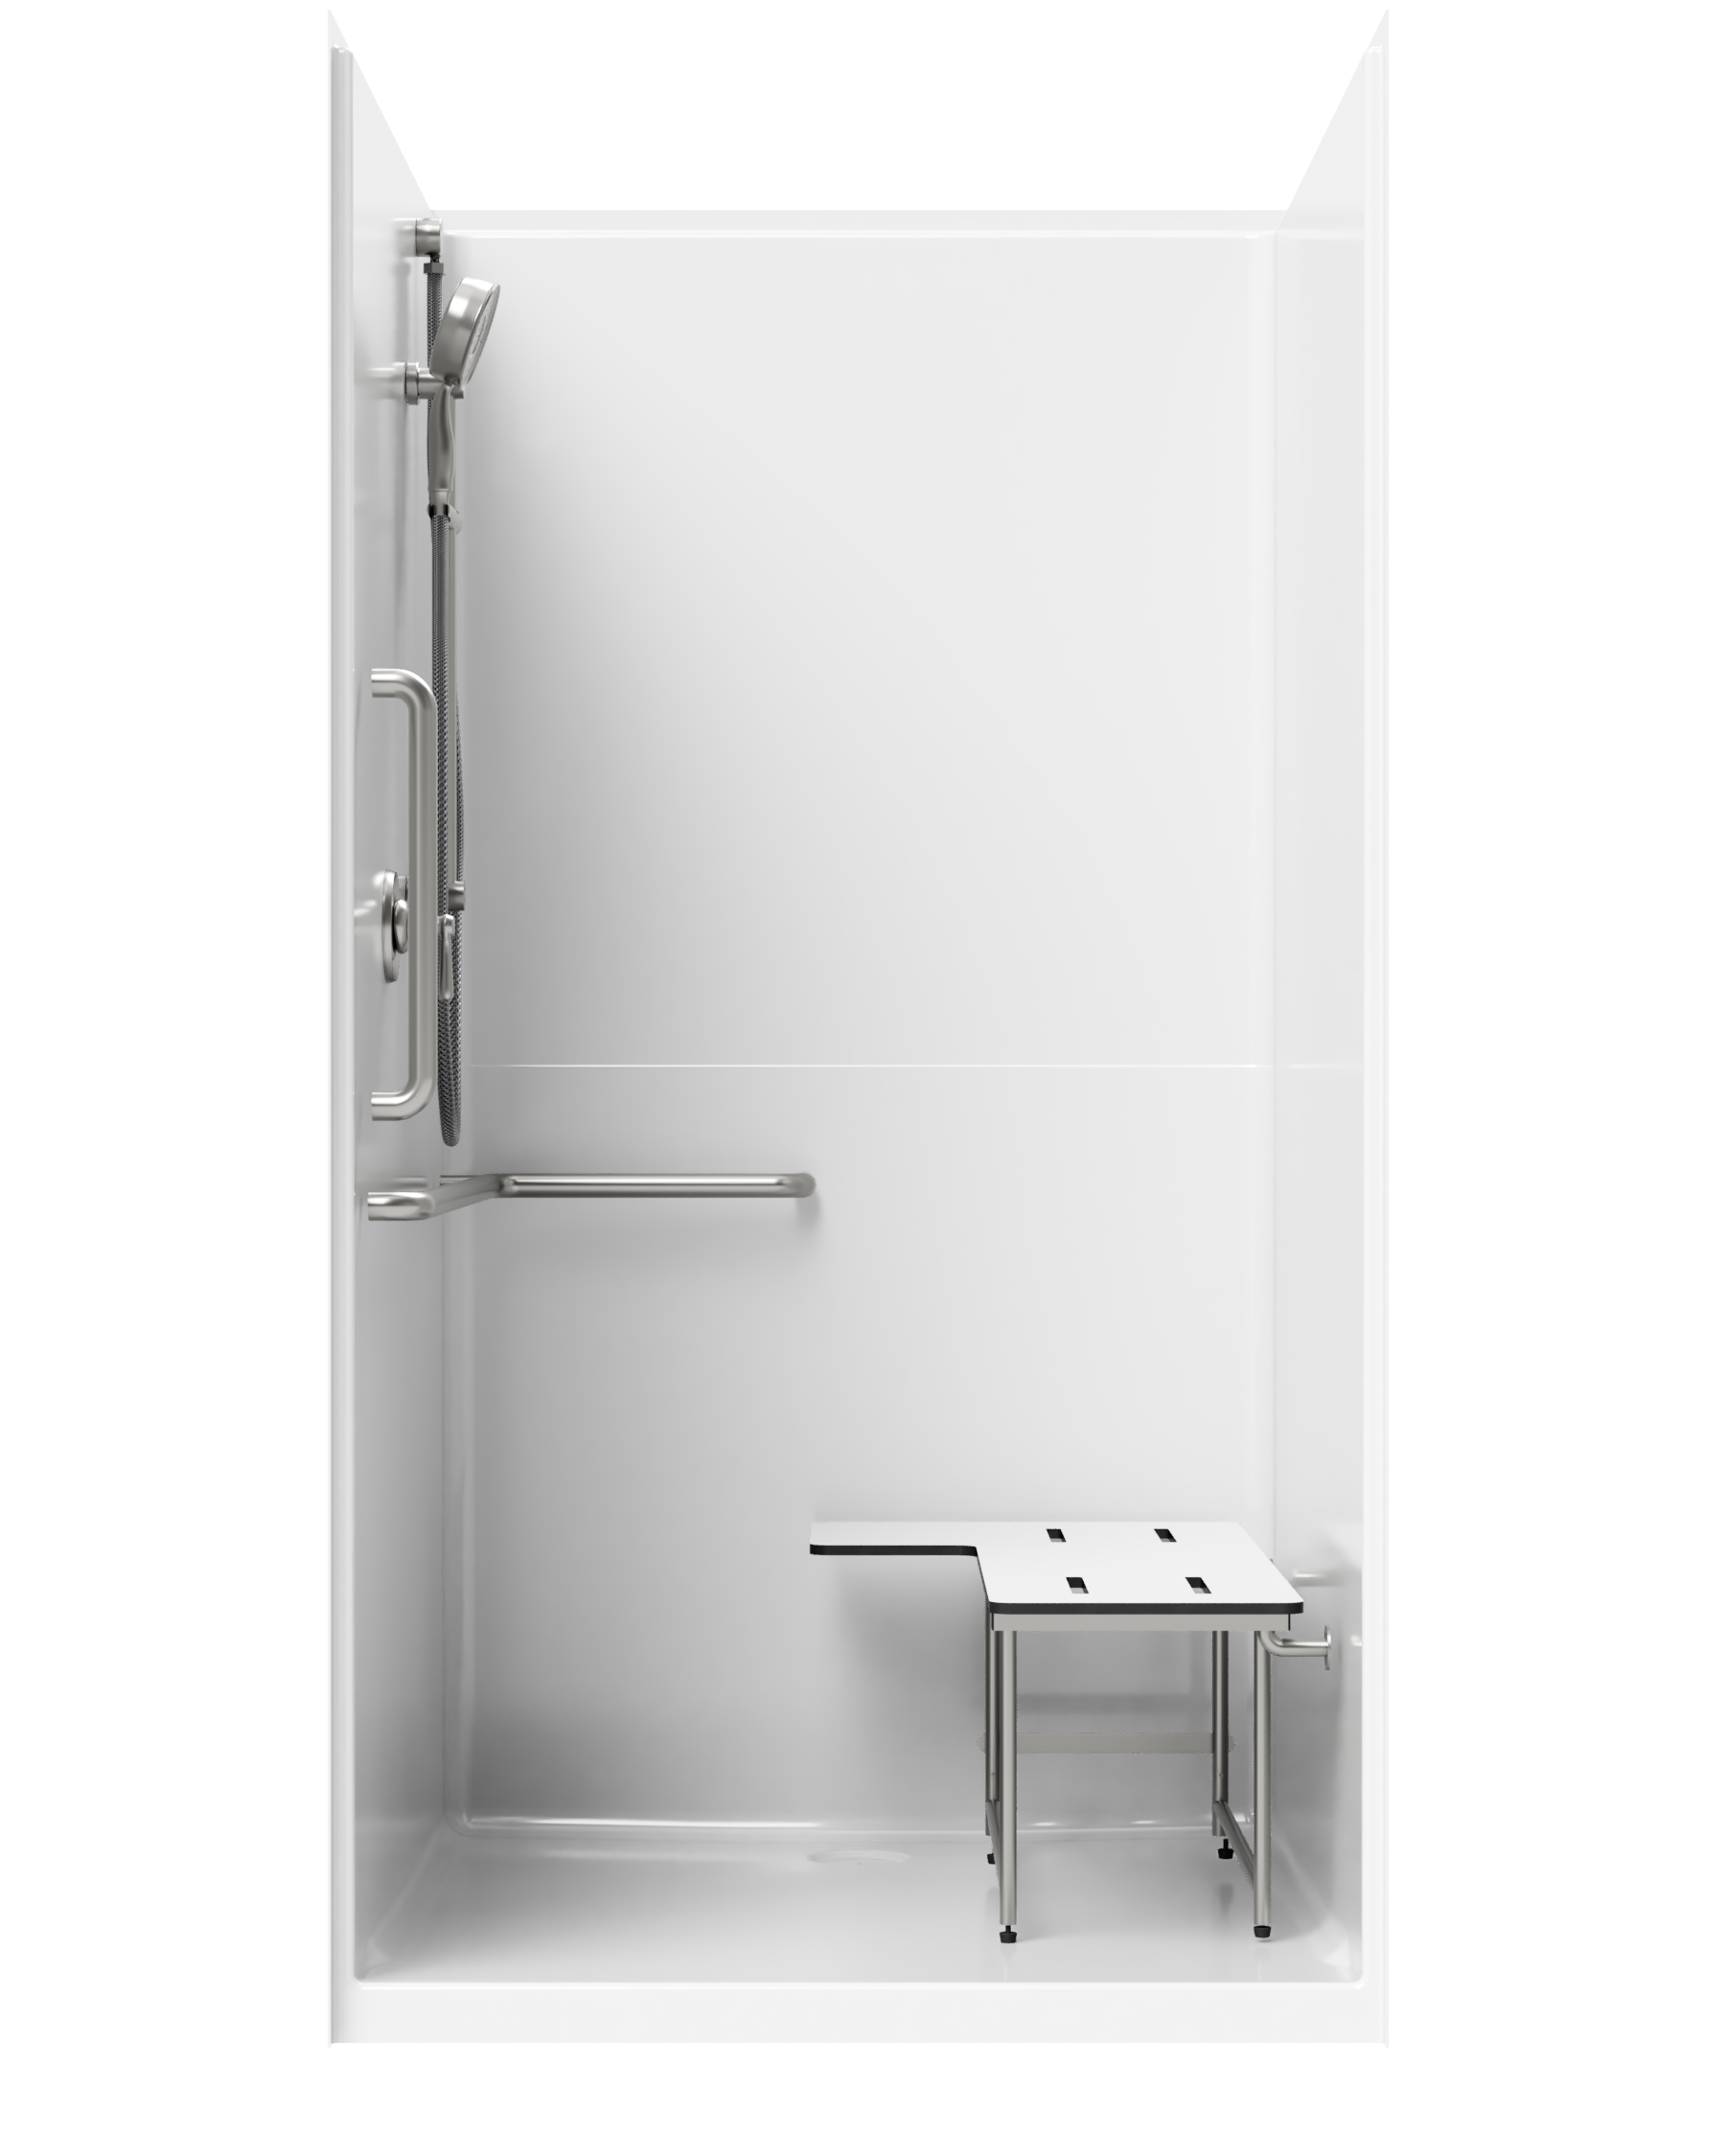 shower with seat